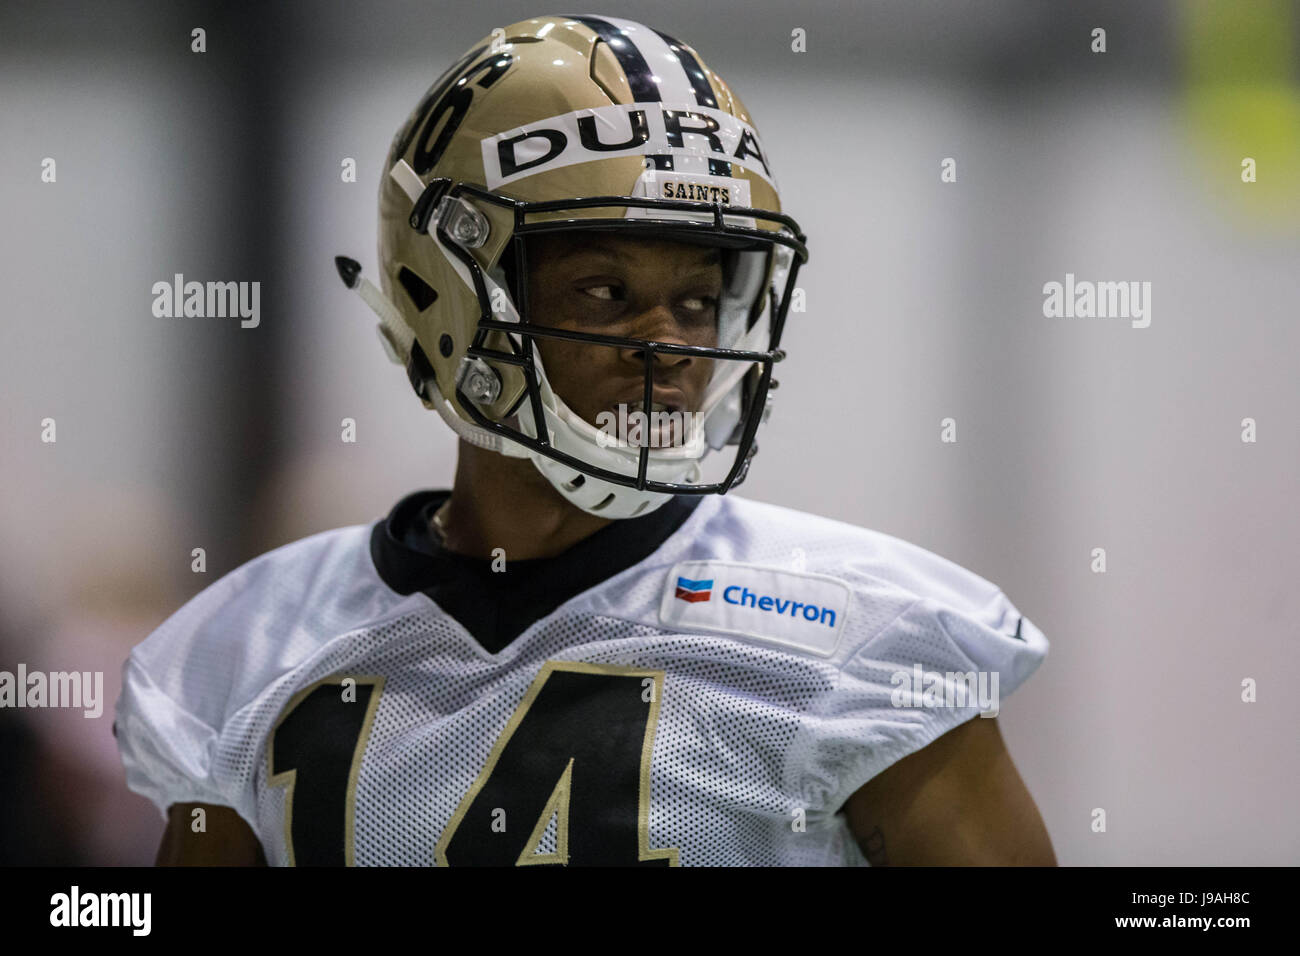 June 01, 2017 - New Orleans Saints wide receiver Travin Dural (14) in action during the organized team activities at the New Orleans Saints Training Facility in Metairie, LA. Stephen Lew/CSM Stock Photo